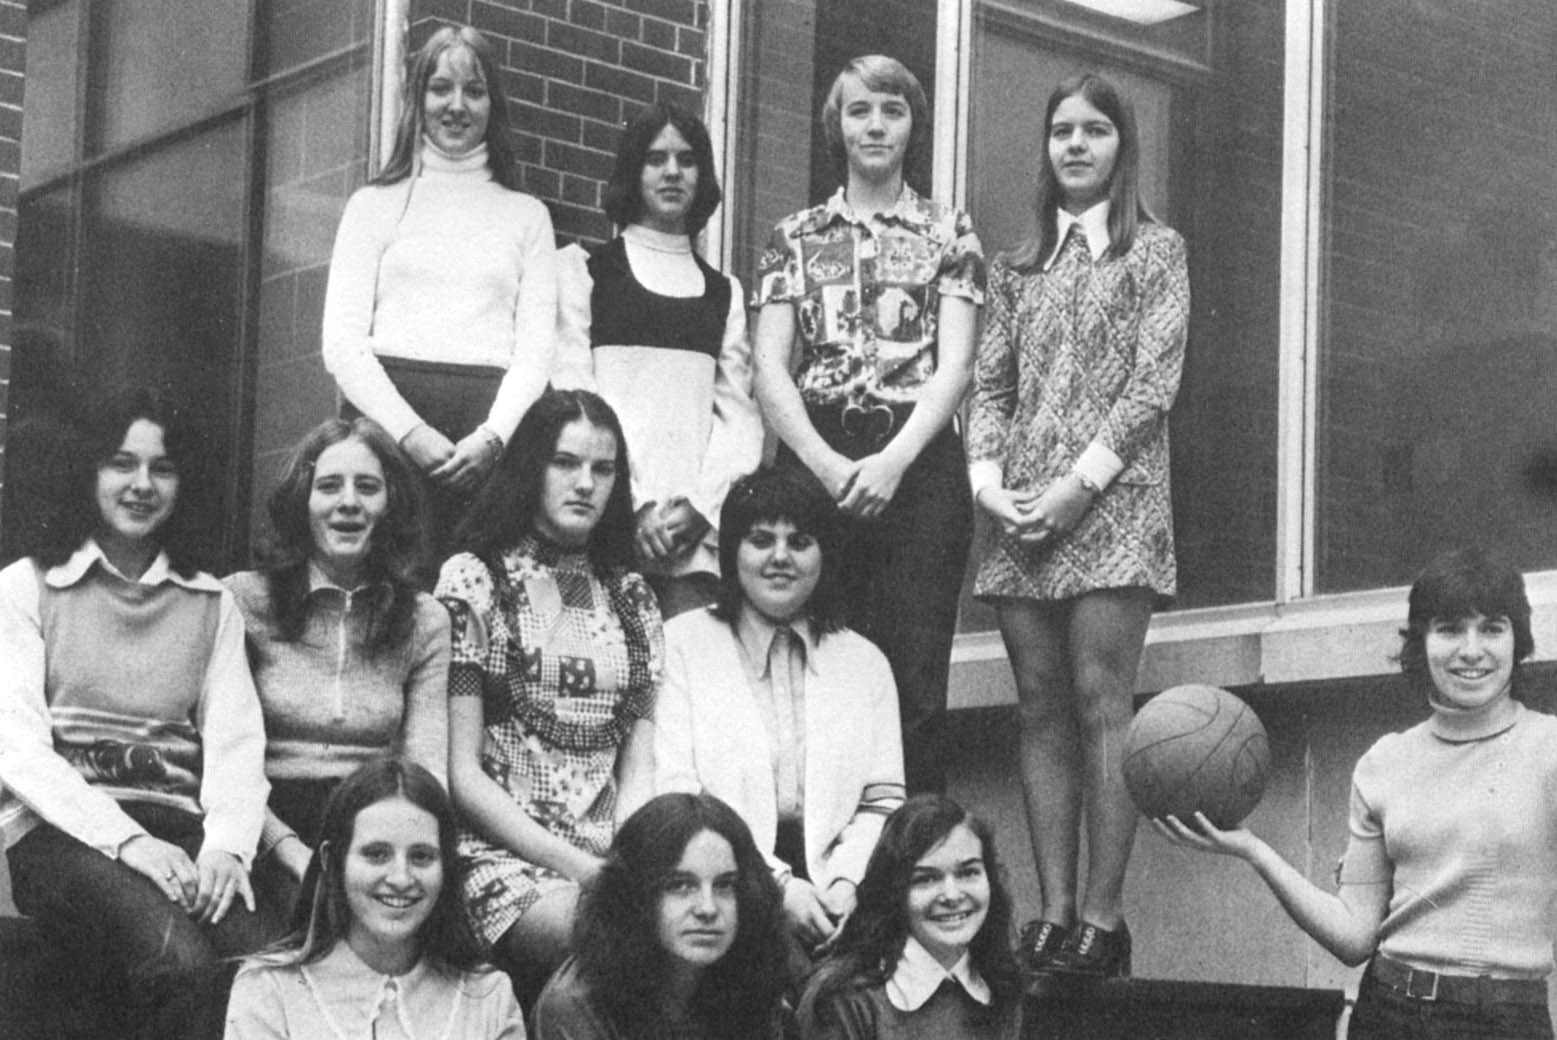 (Click to magnify) FRONT ROW: M. Ball, R. Rich, J. Kester, S. Kester; ***SECOND ROW: L. Morrison, T. Ryan, J. Ferguson, Susan Reed; ***BACK ROW: S. Doble, S. Armstrong, D. Arnold, B. Arnold.